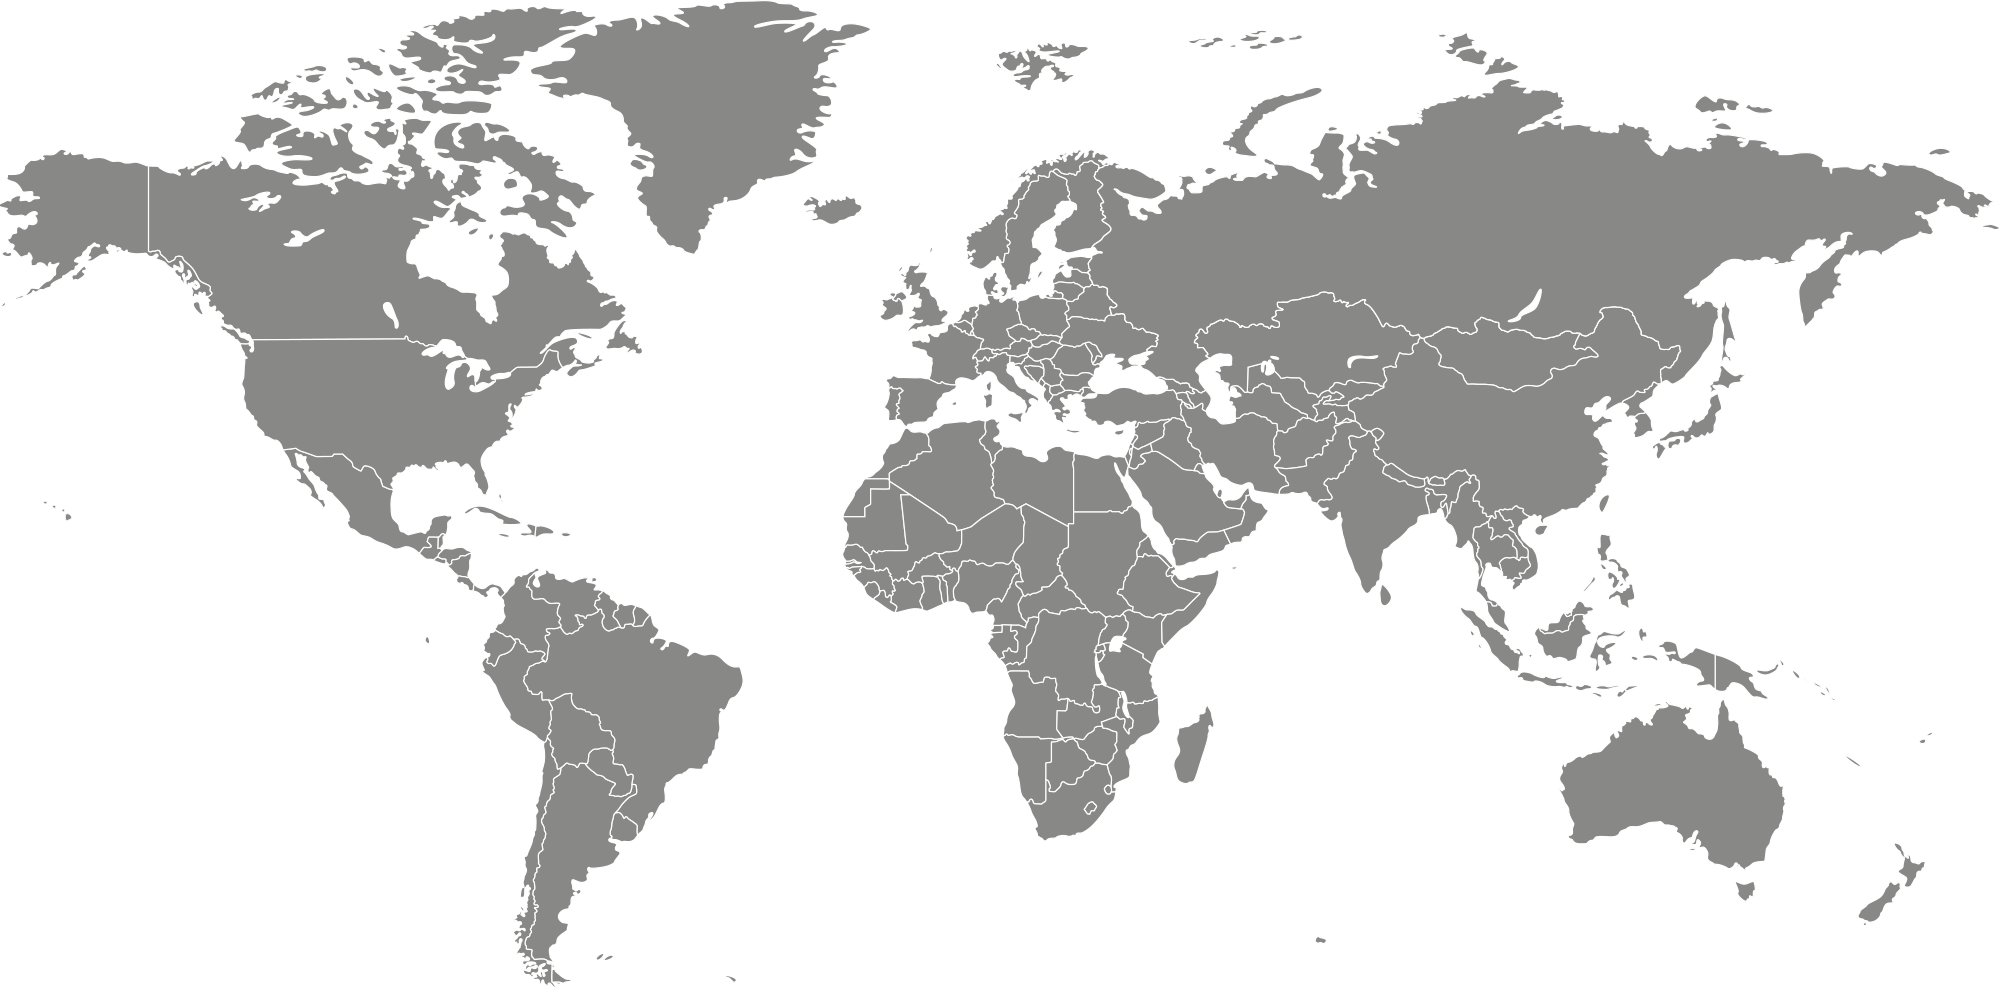 World map in gray color